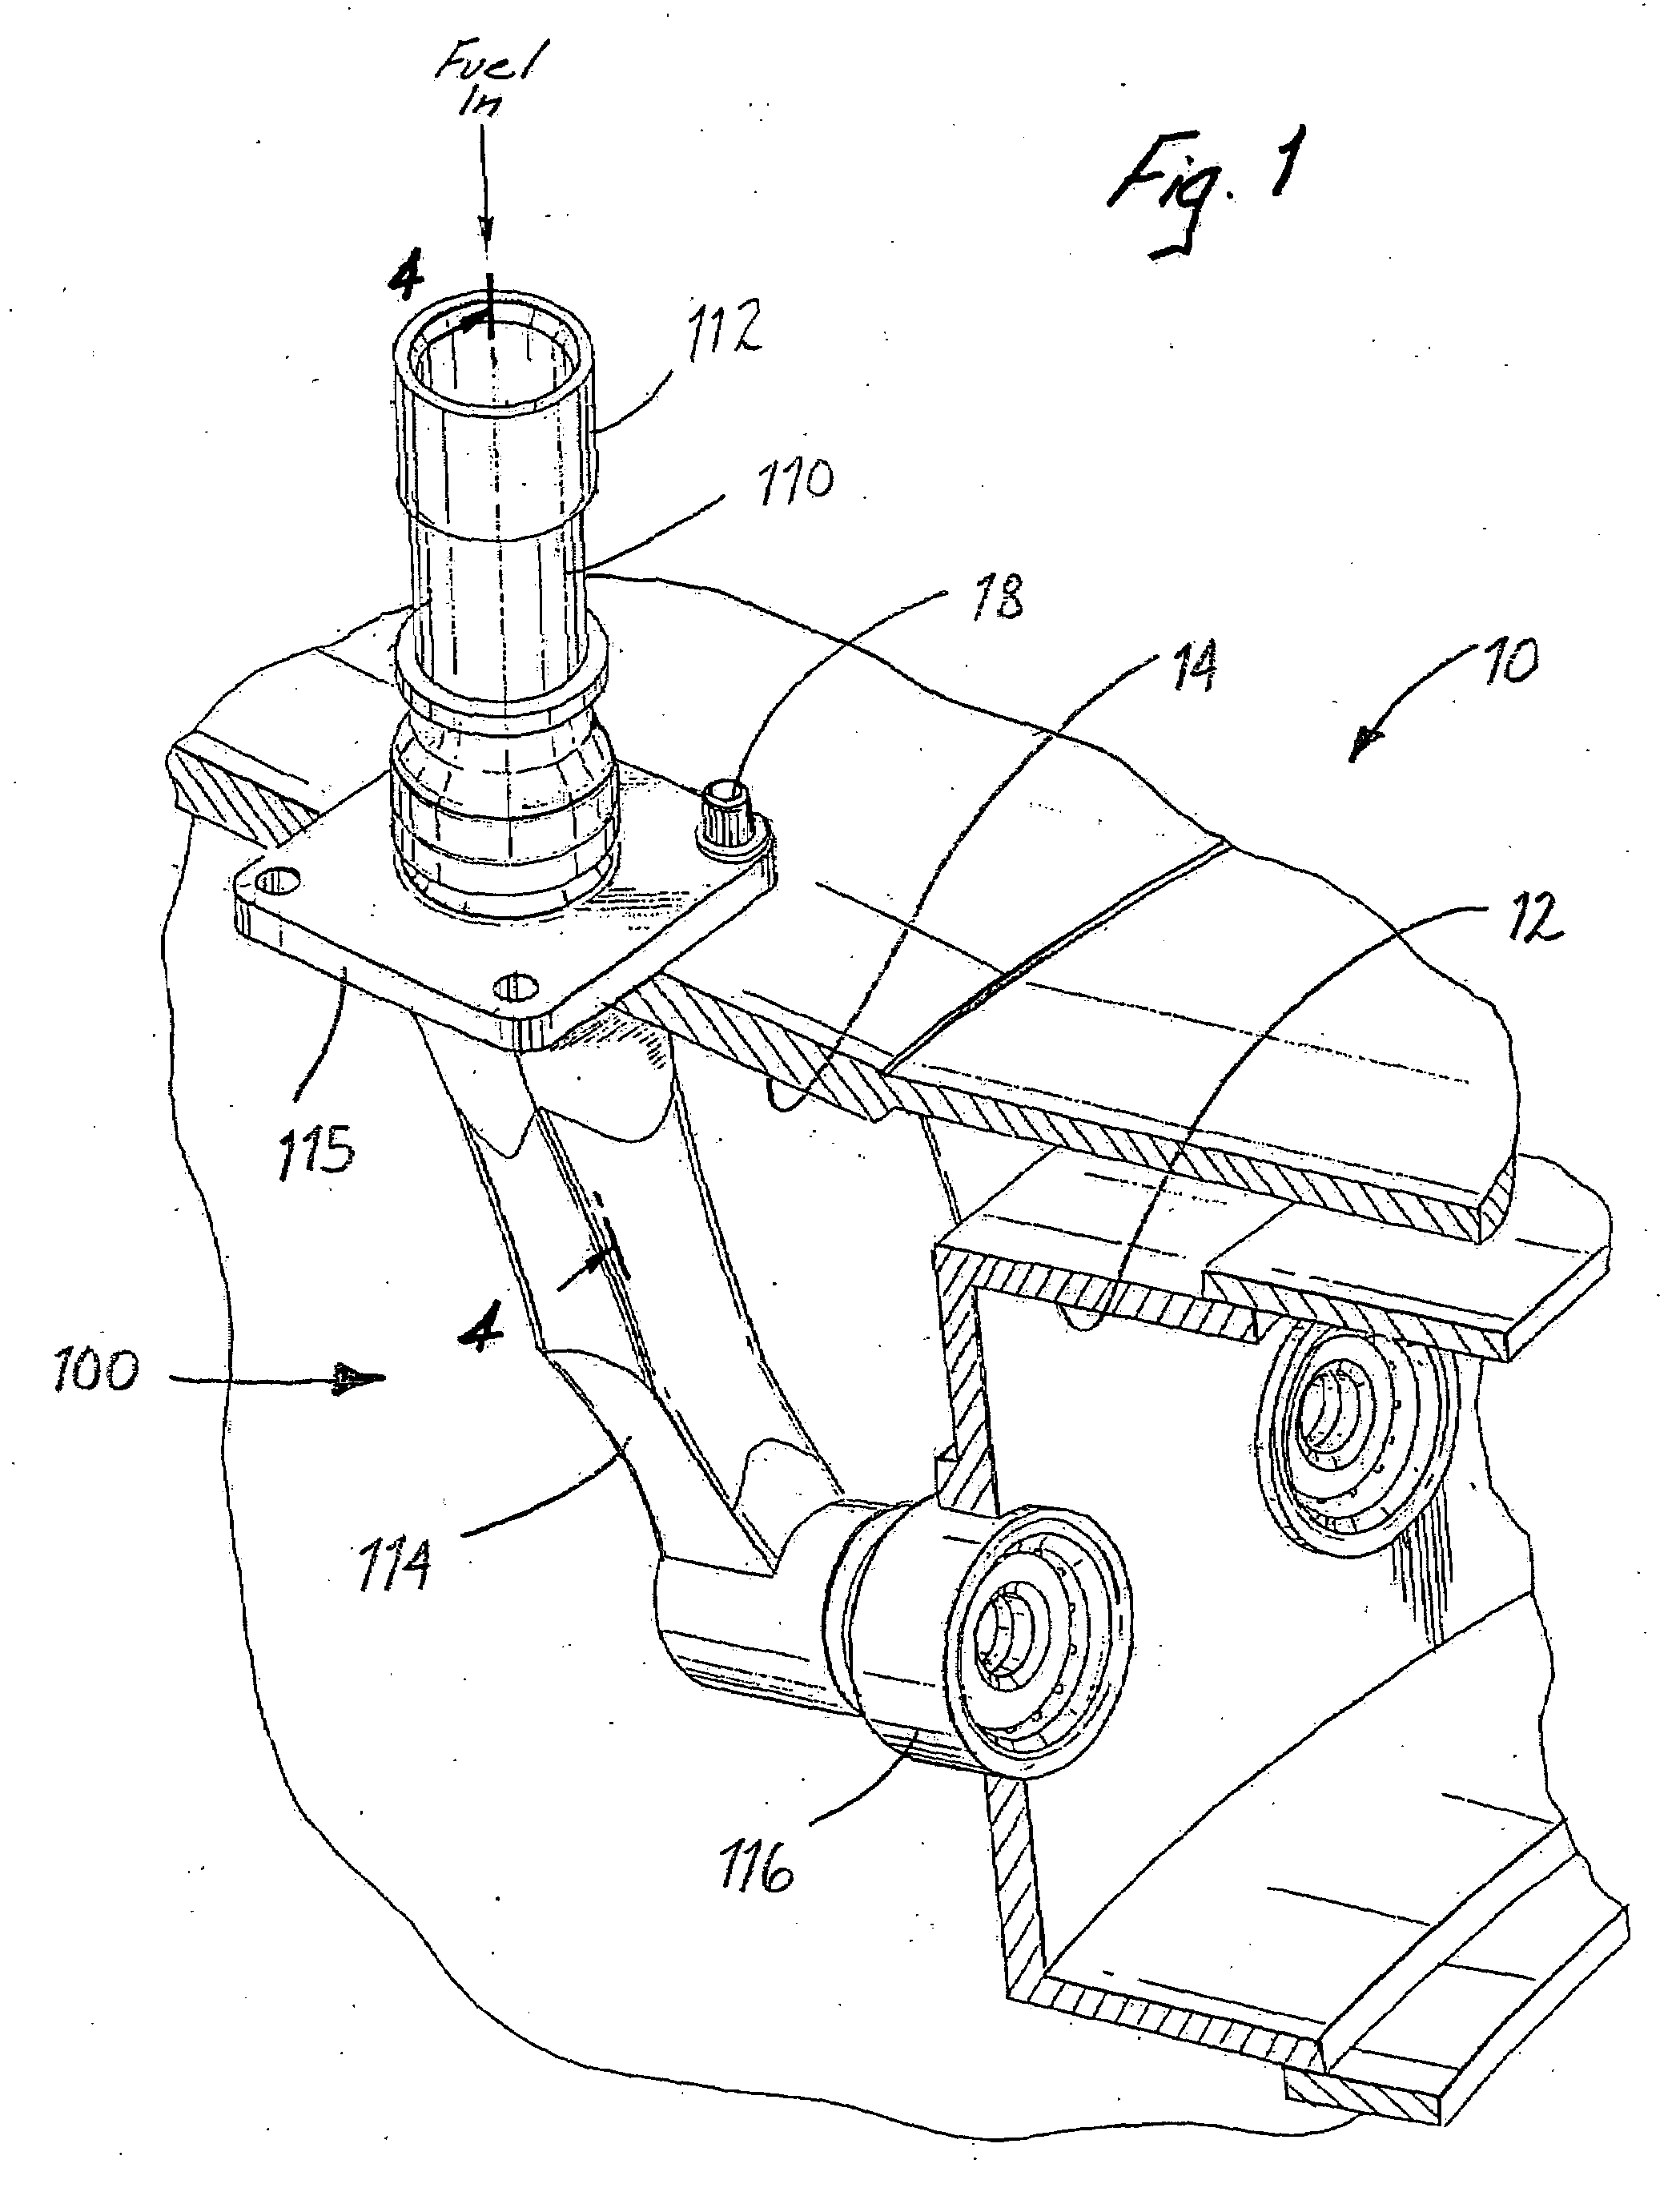 Dynamic sealing assembly to accommodate differential thermal growth of fuel injector components